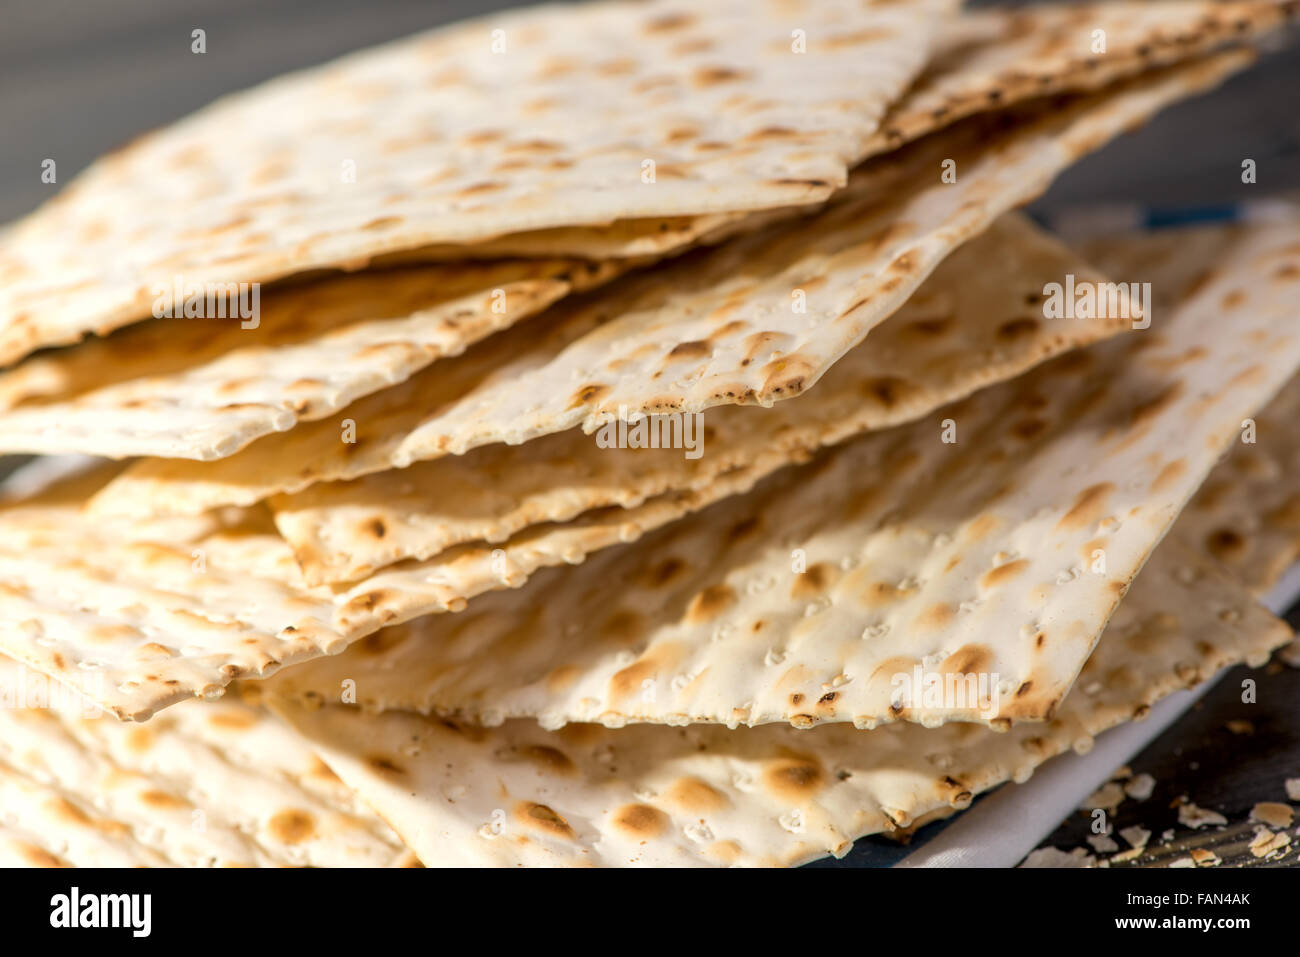 Matzah - An unleavened bread, traditionally eaten by Jews during the Passover festival Stock Photo